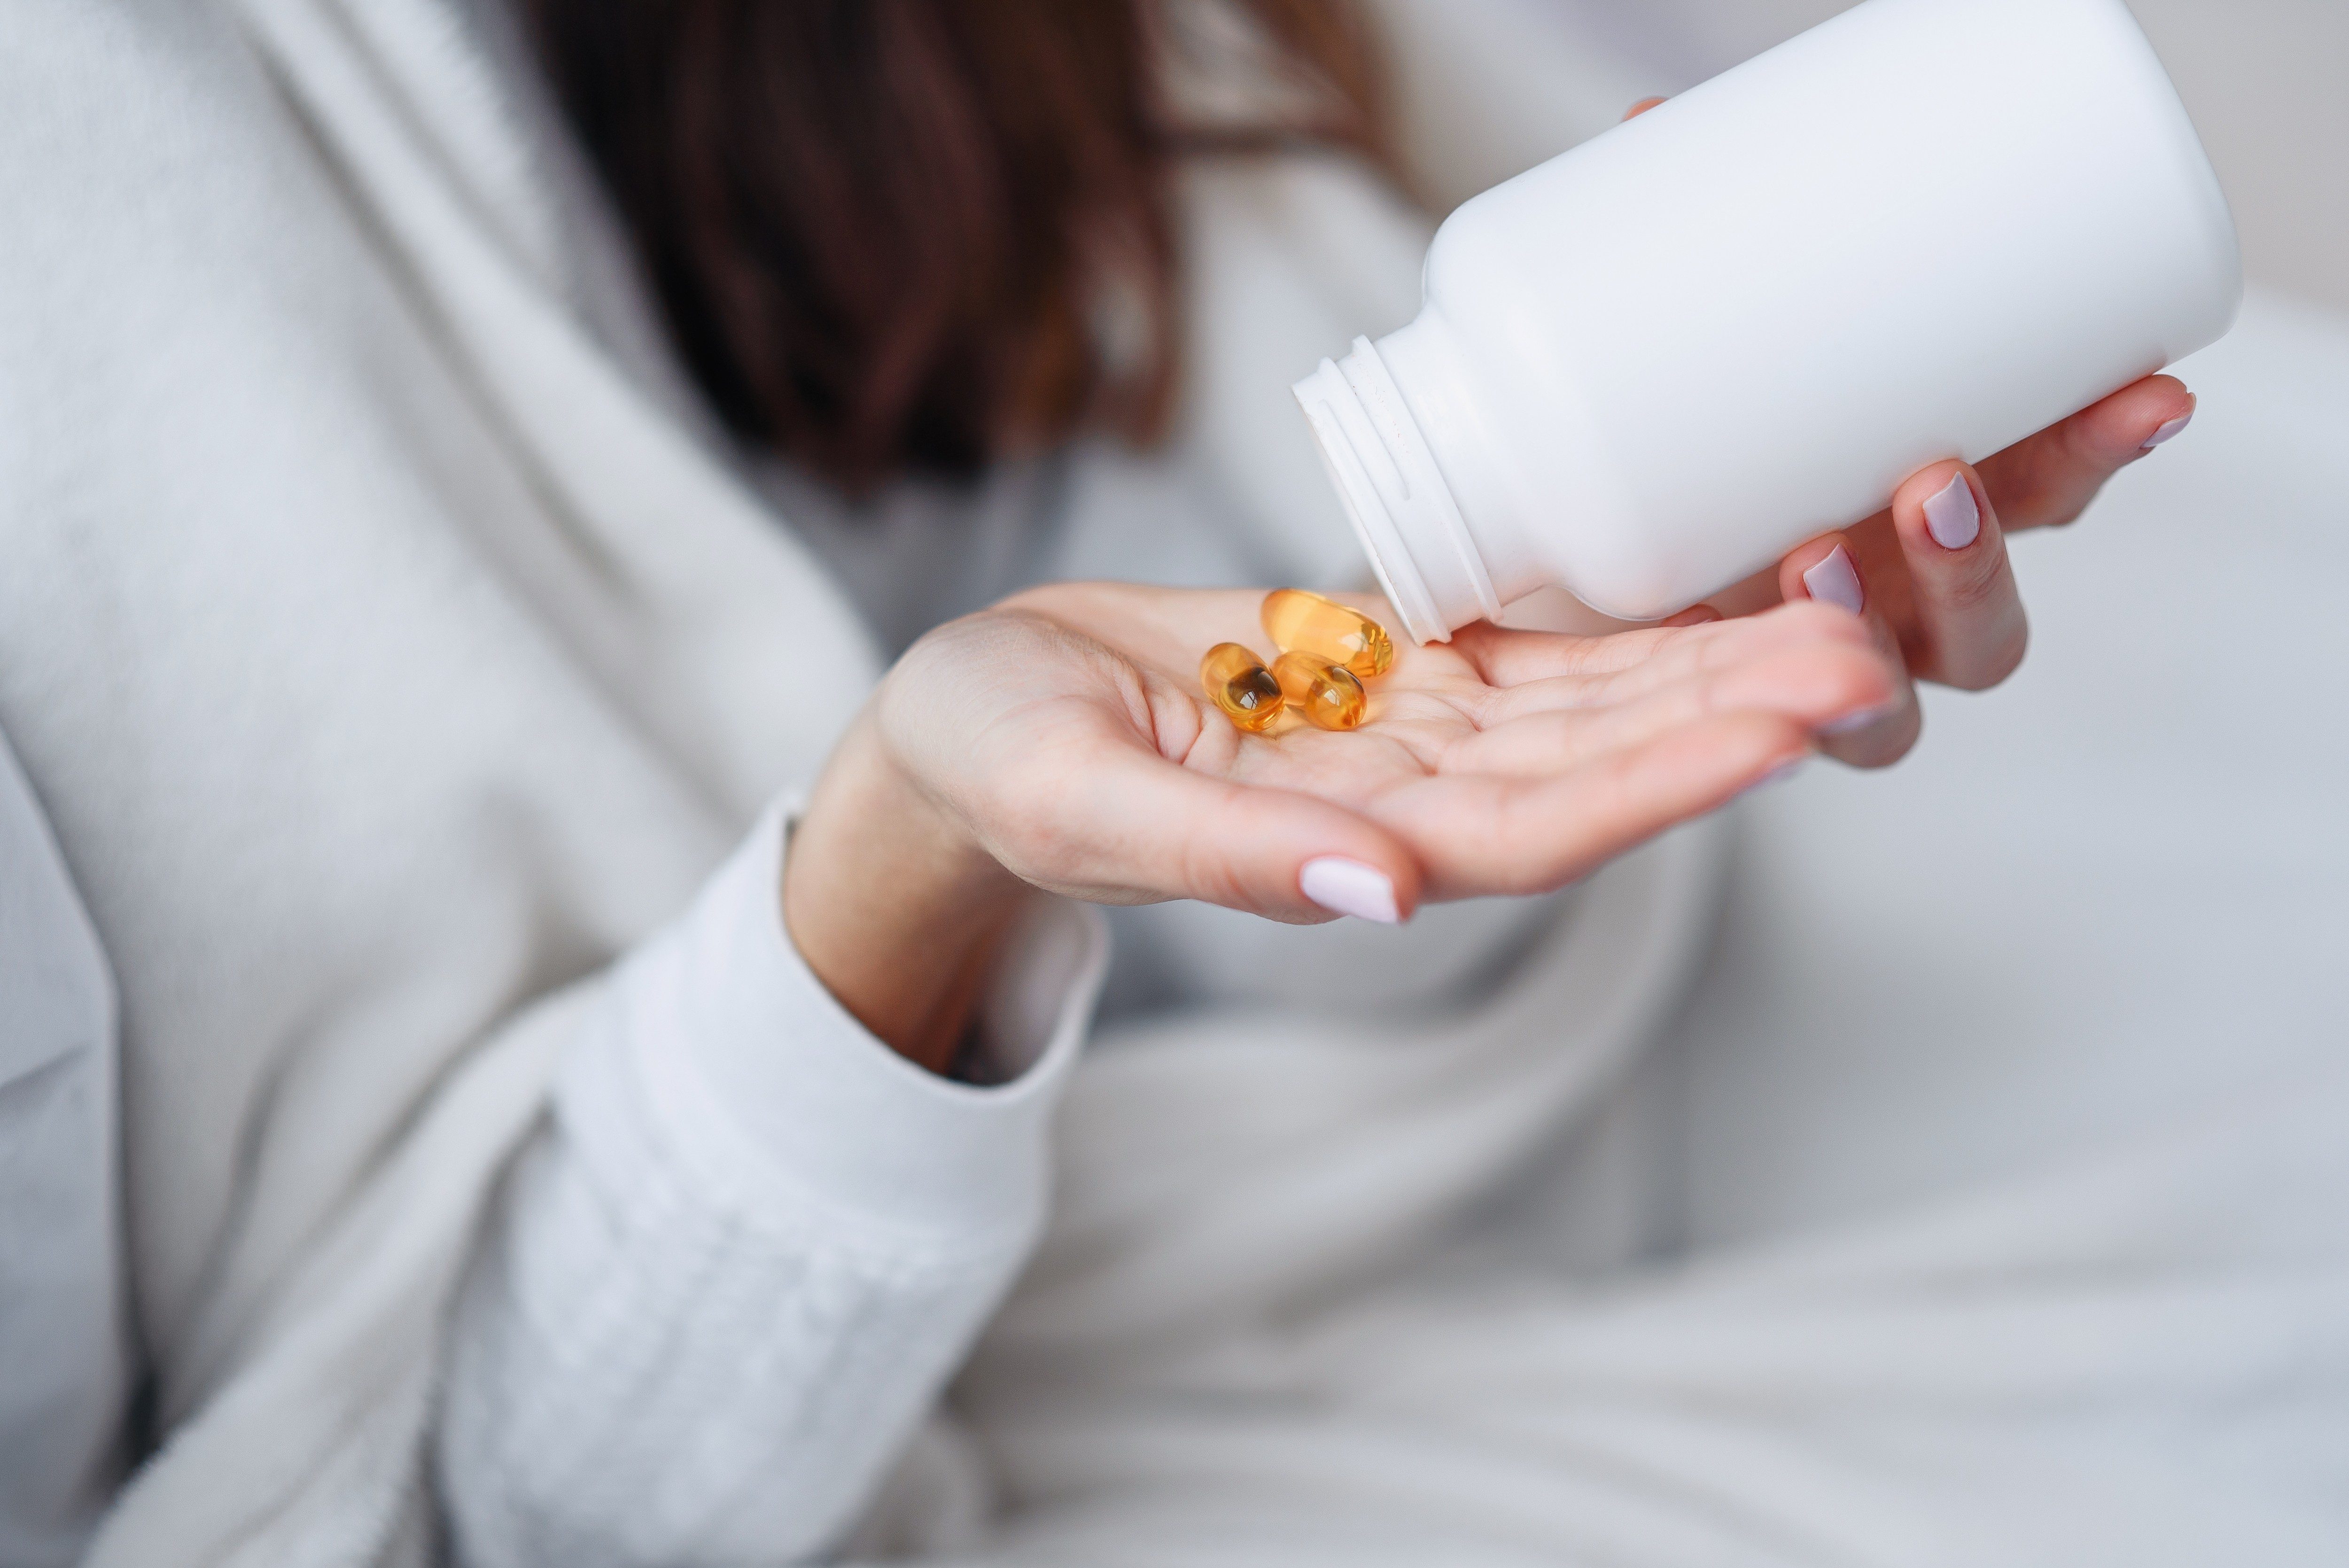 Vitamins and food supplements concept. Closeup of female hand pouring yellow pills out of bottle into palm. Woman spilling out medication, tablets, capsules on hand.